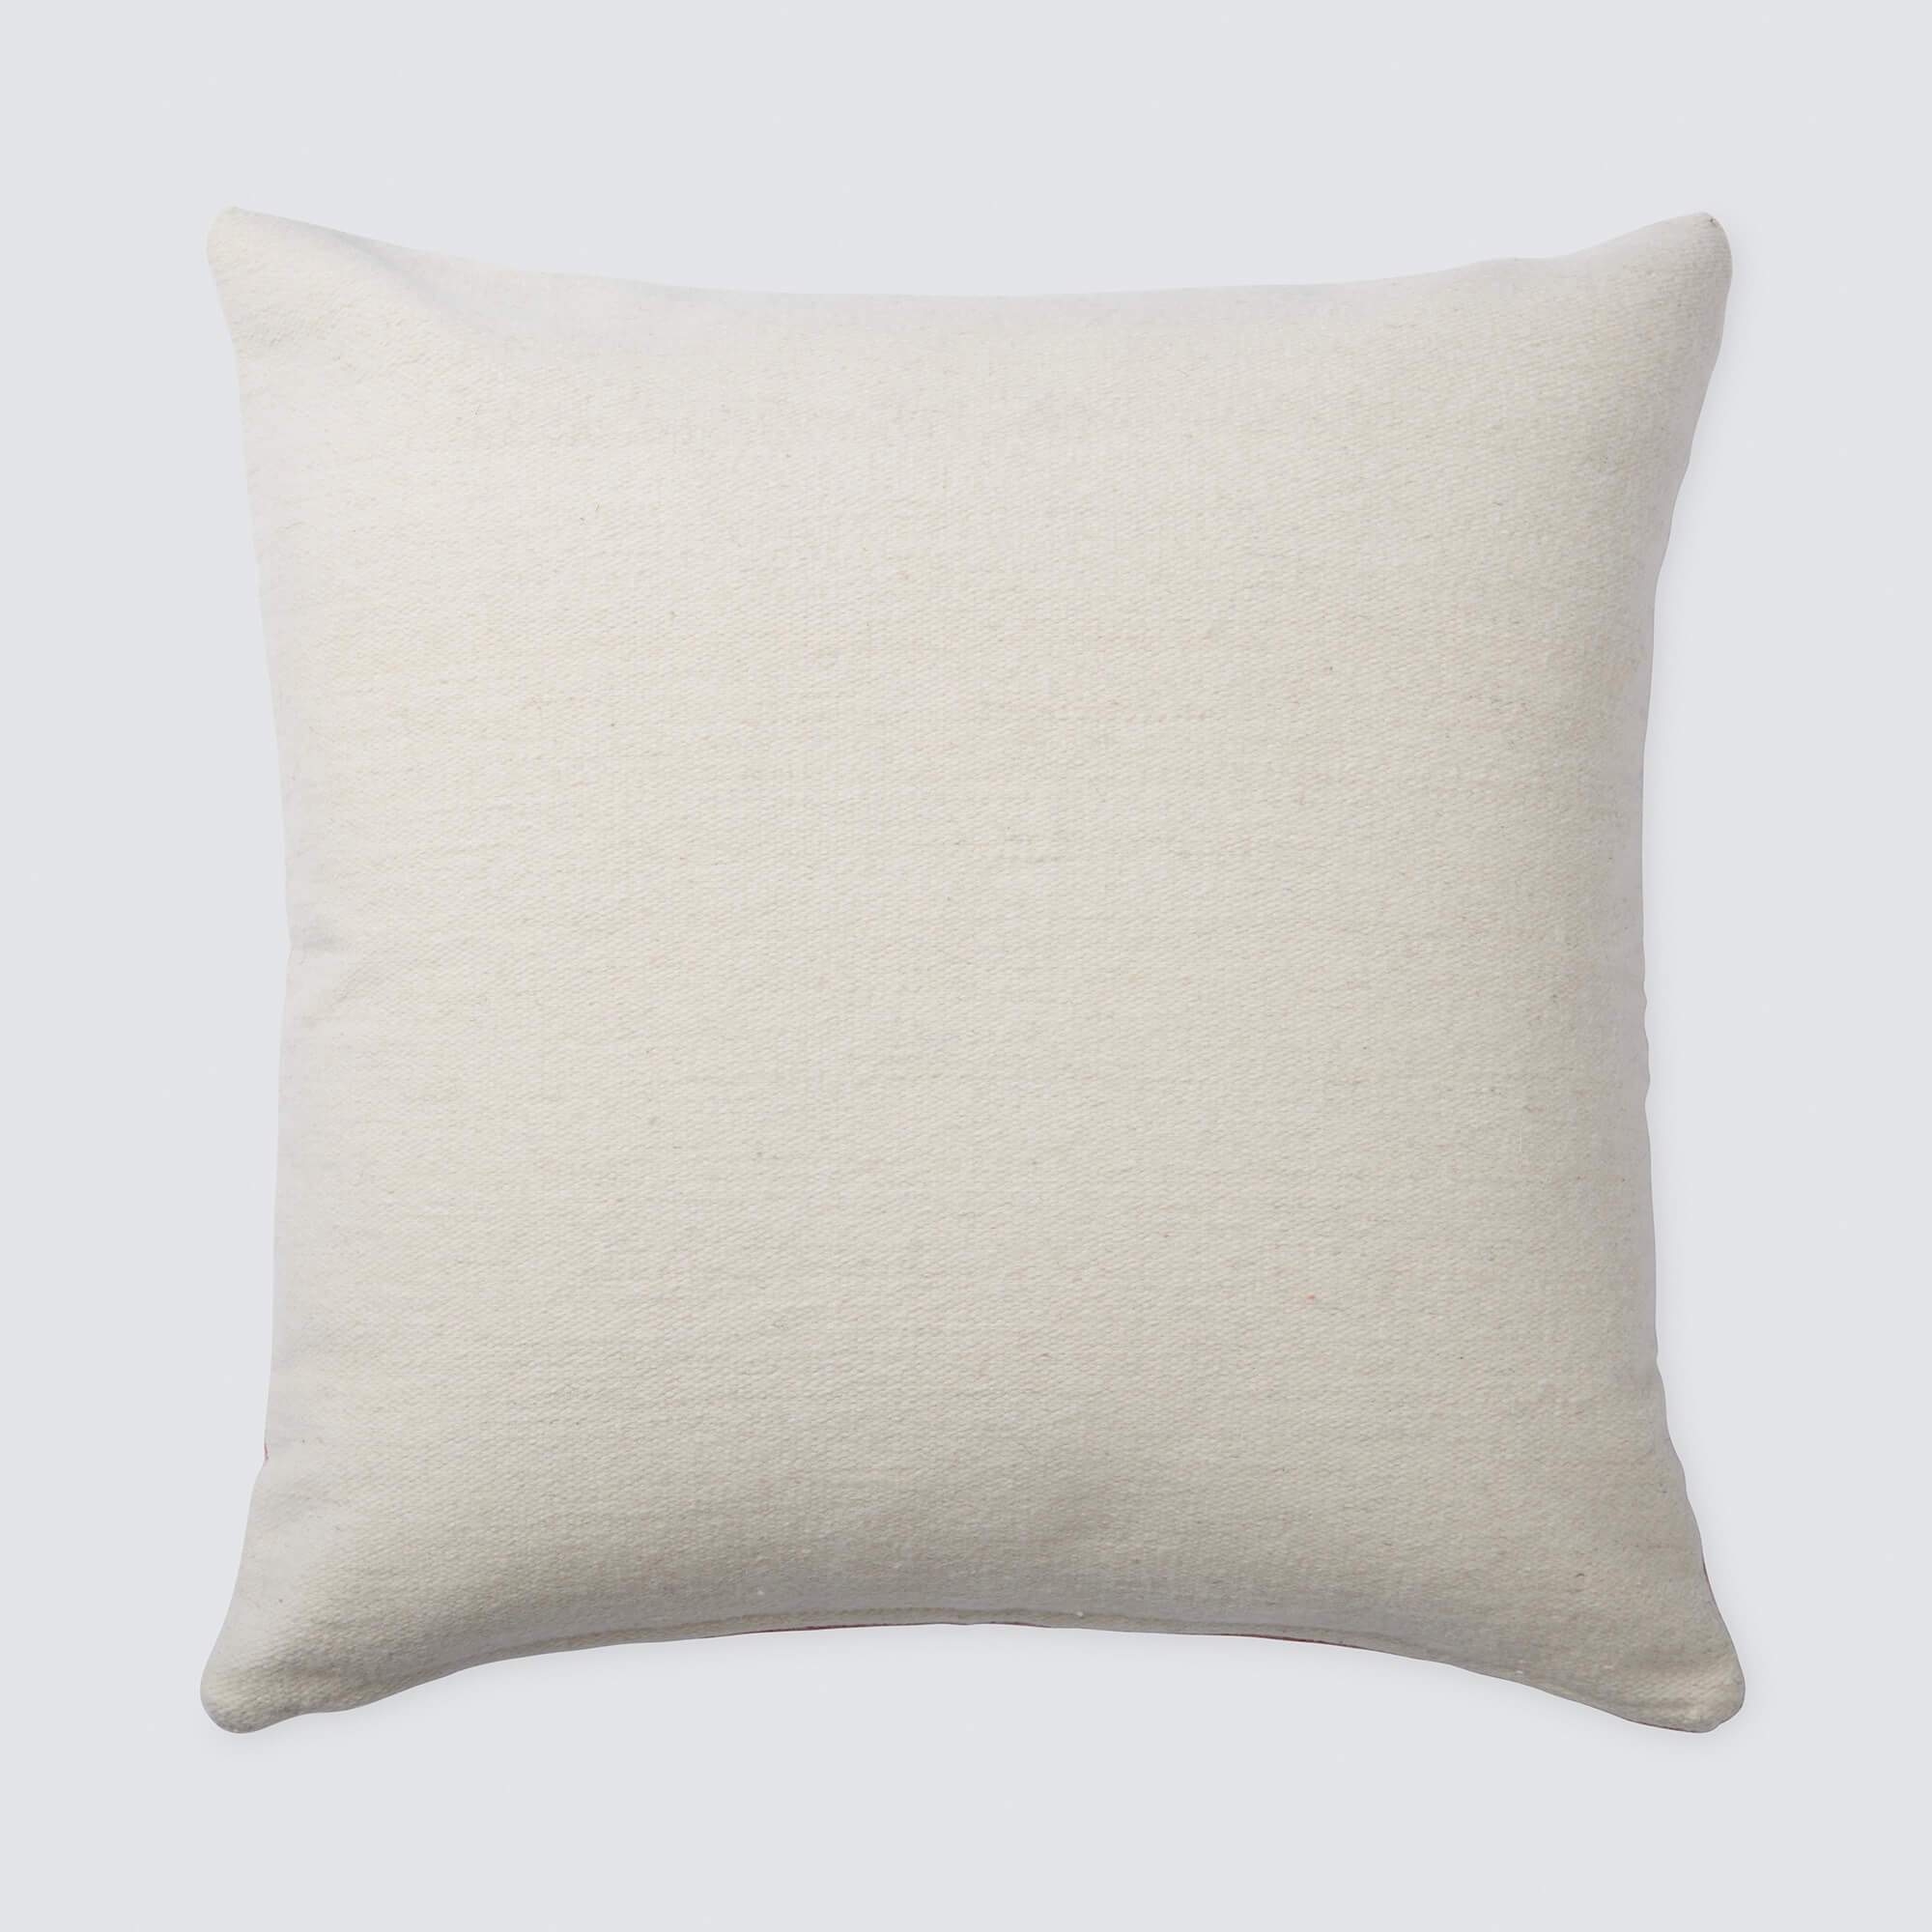 The Citizenry Marea Pillow | 22" x 22" | Made You Blush - Image 8